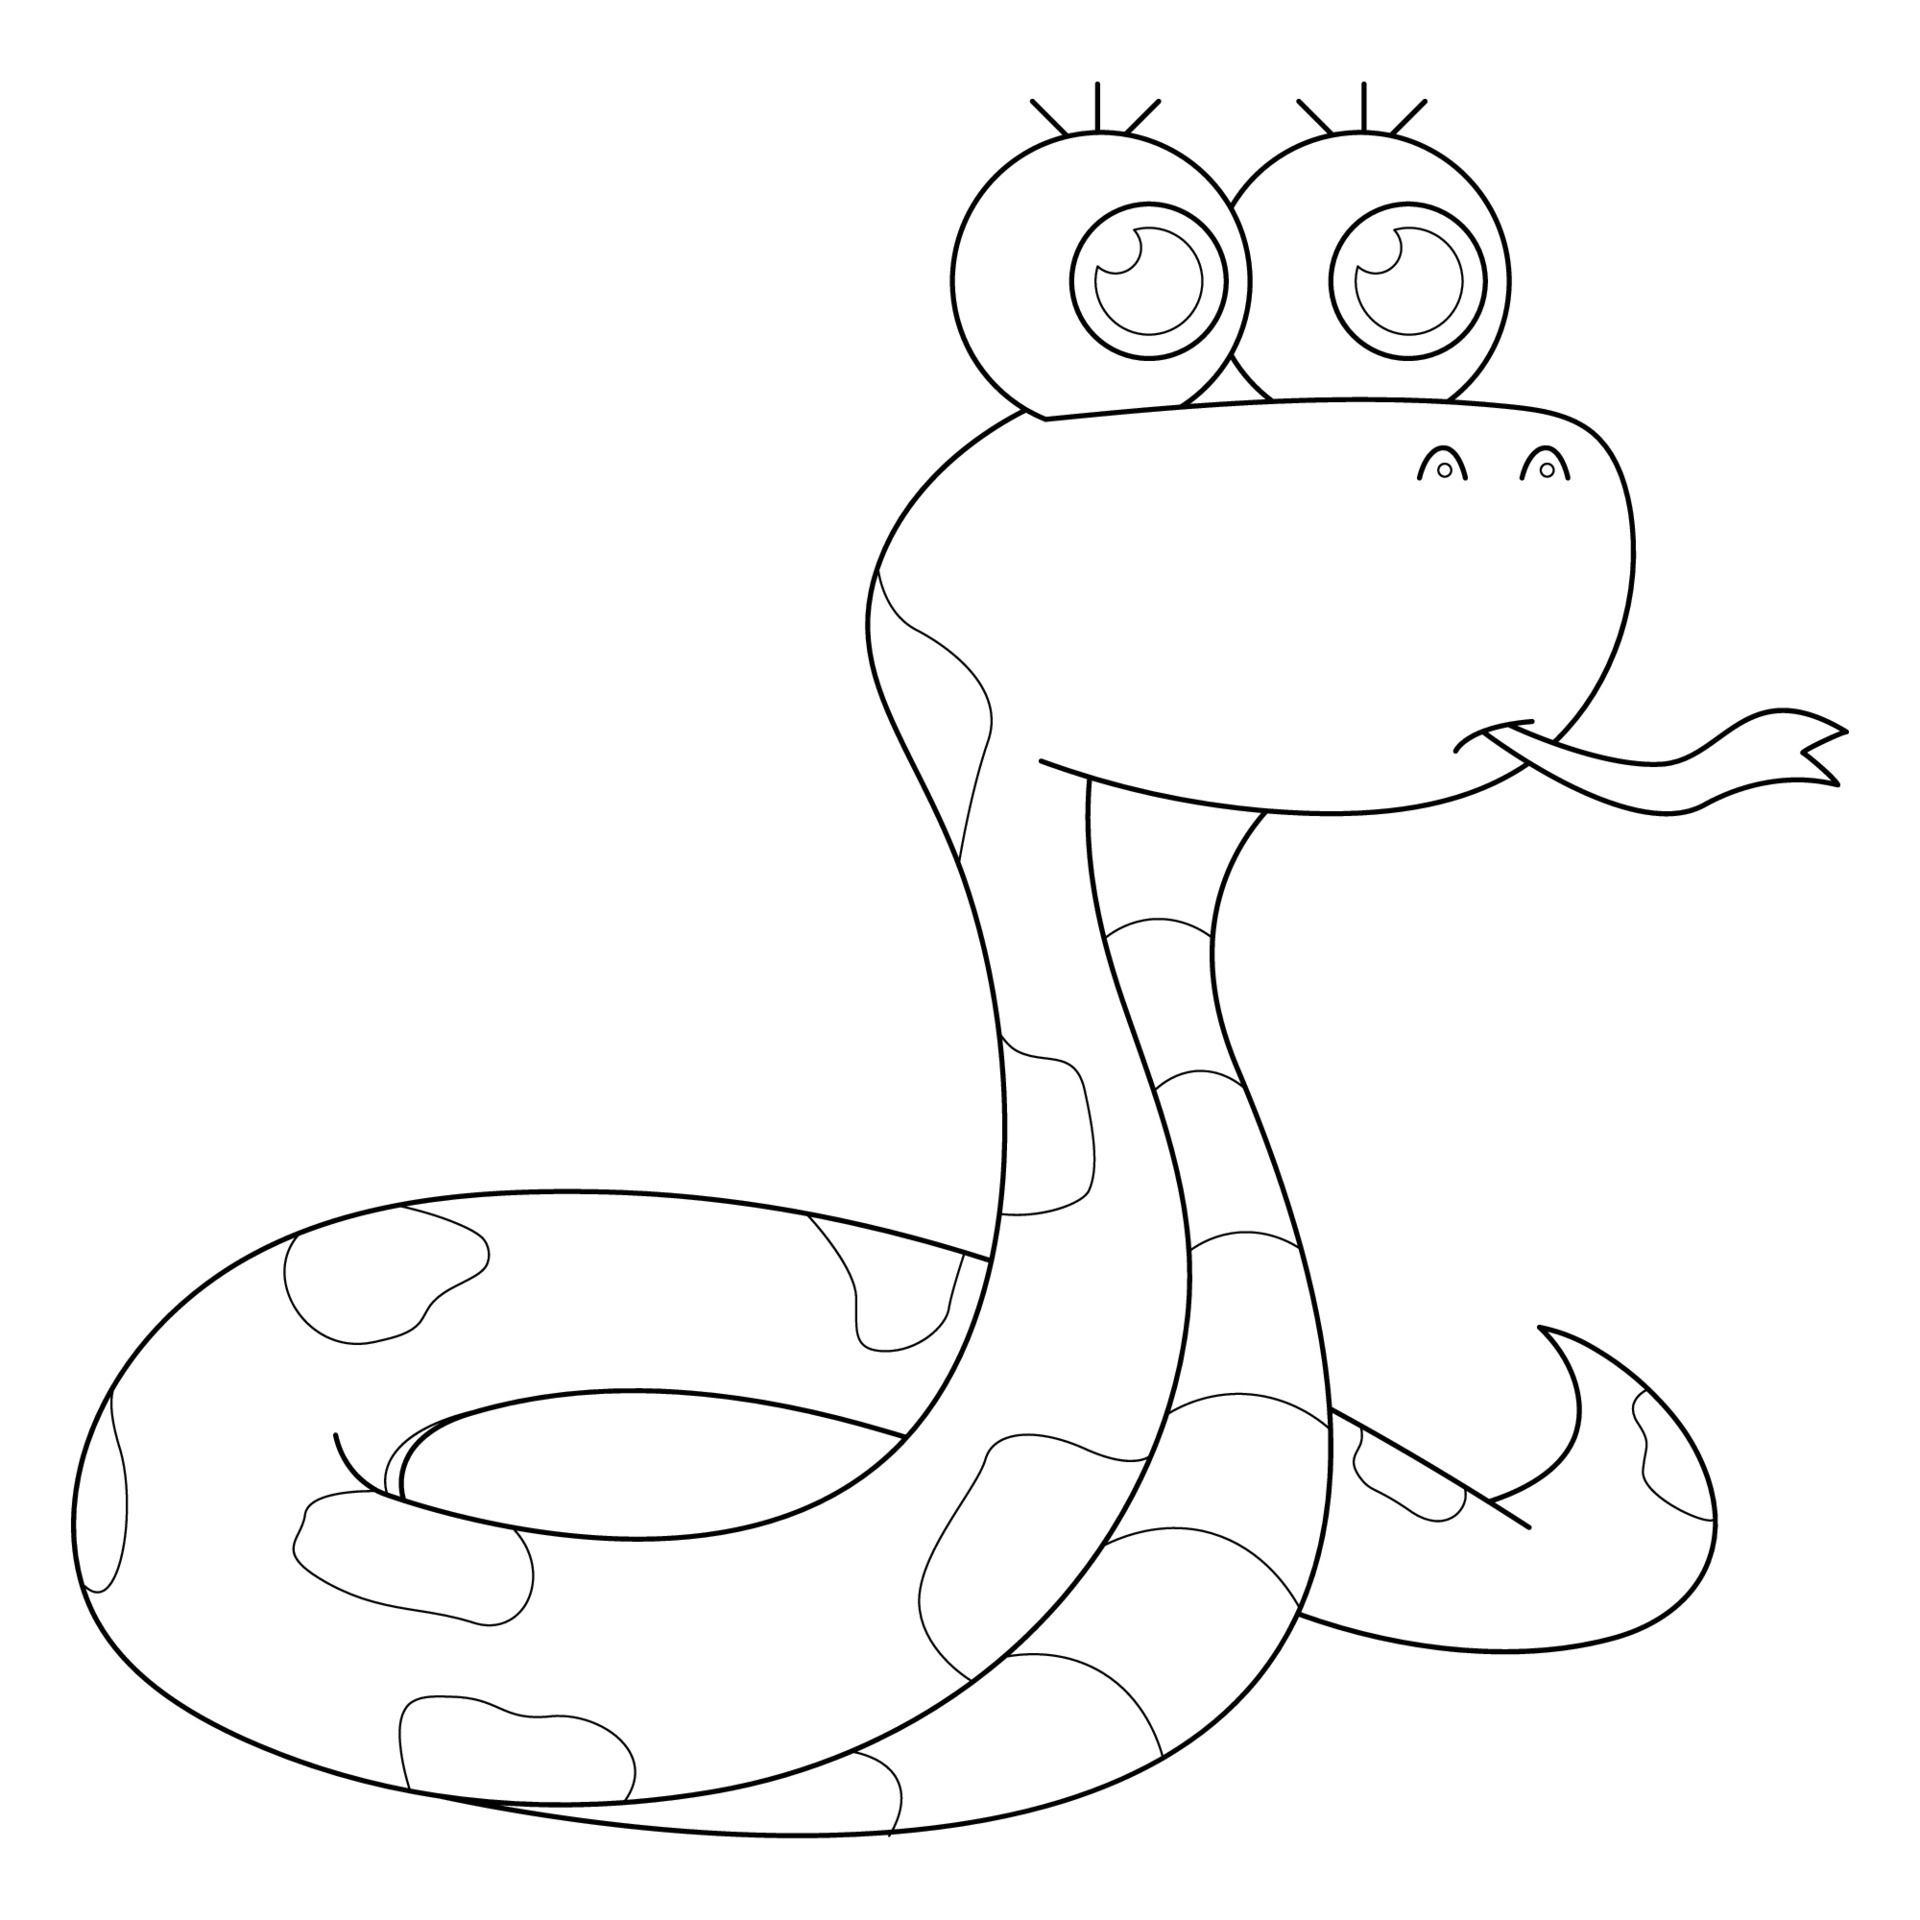 Cute snake suitable for children's coloring page vector illustration ...